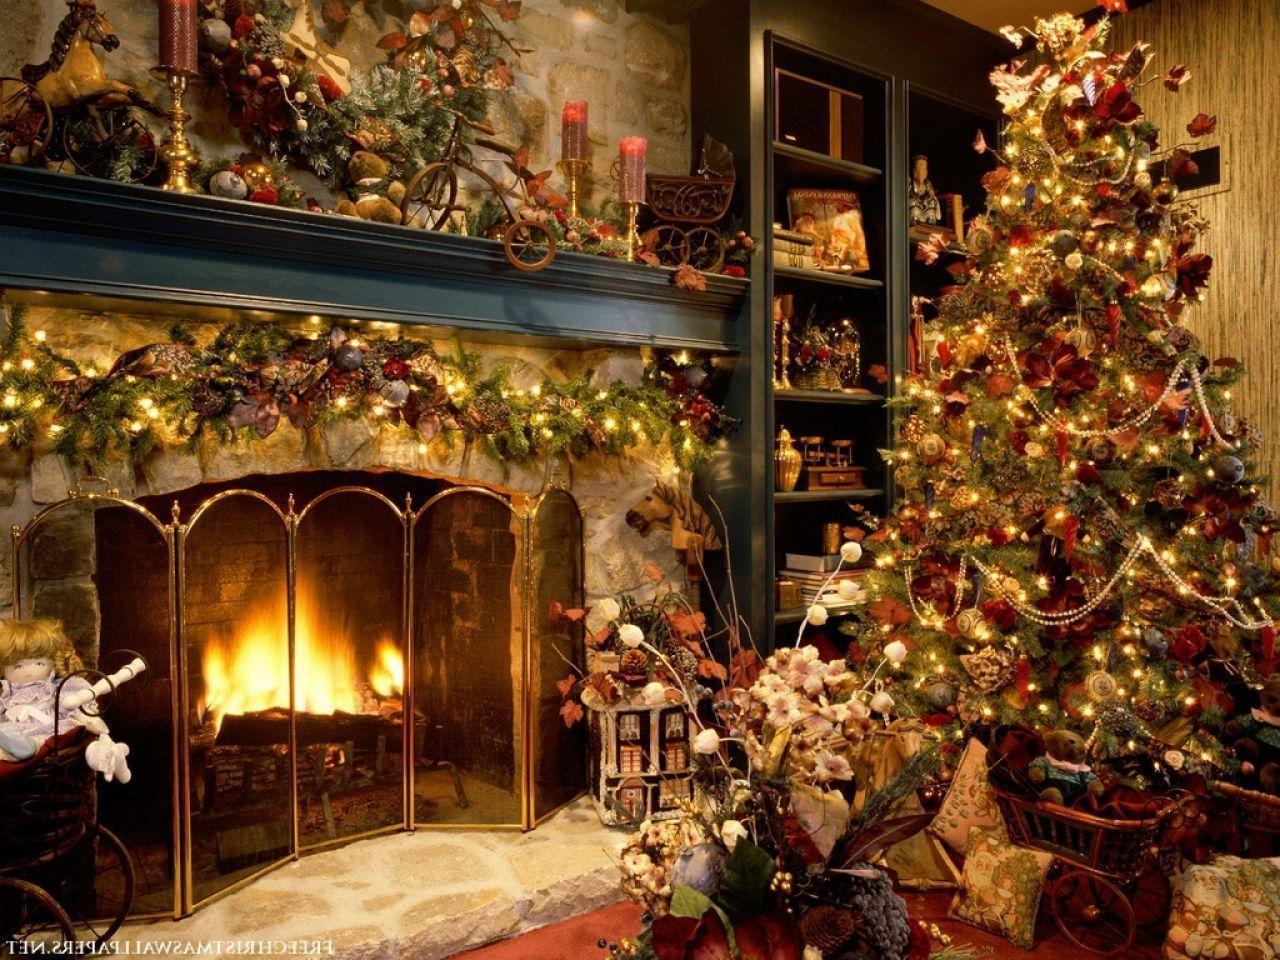 Christmas Tree And Fireplace Wallpaper Plans, Floor Plans